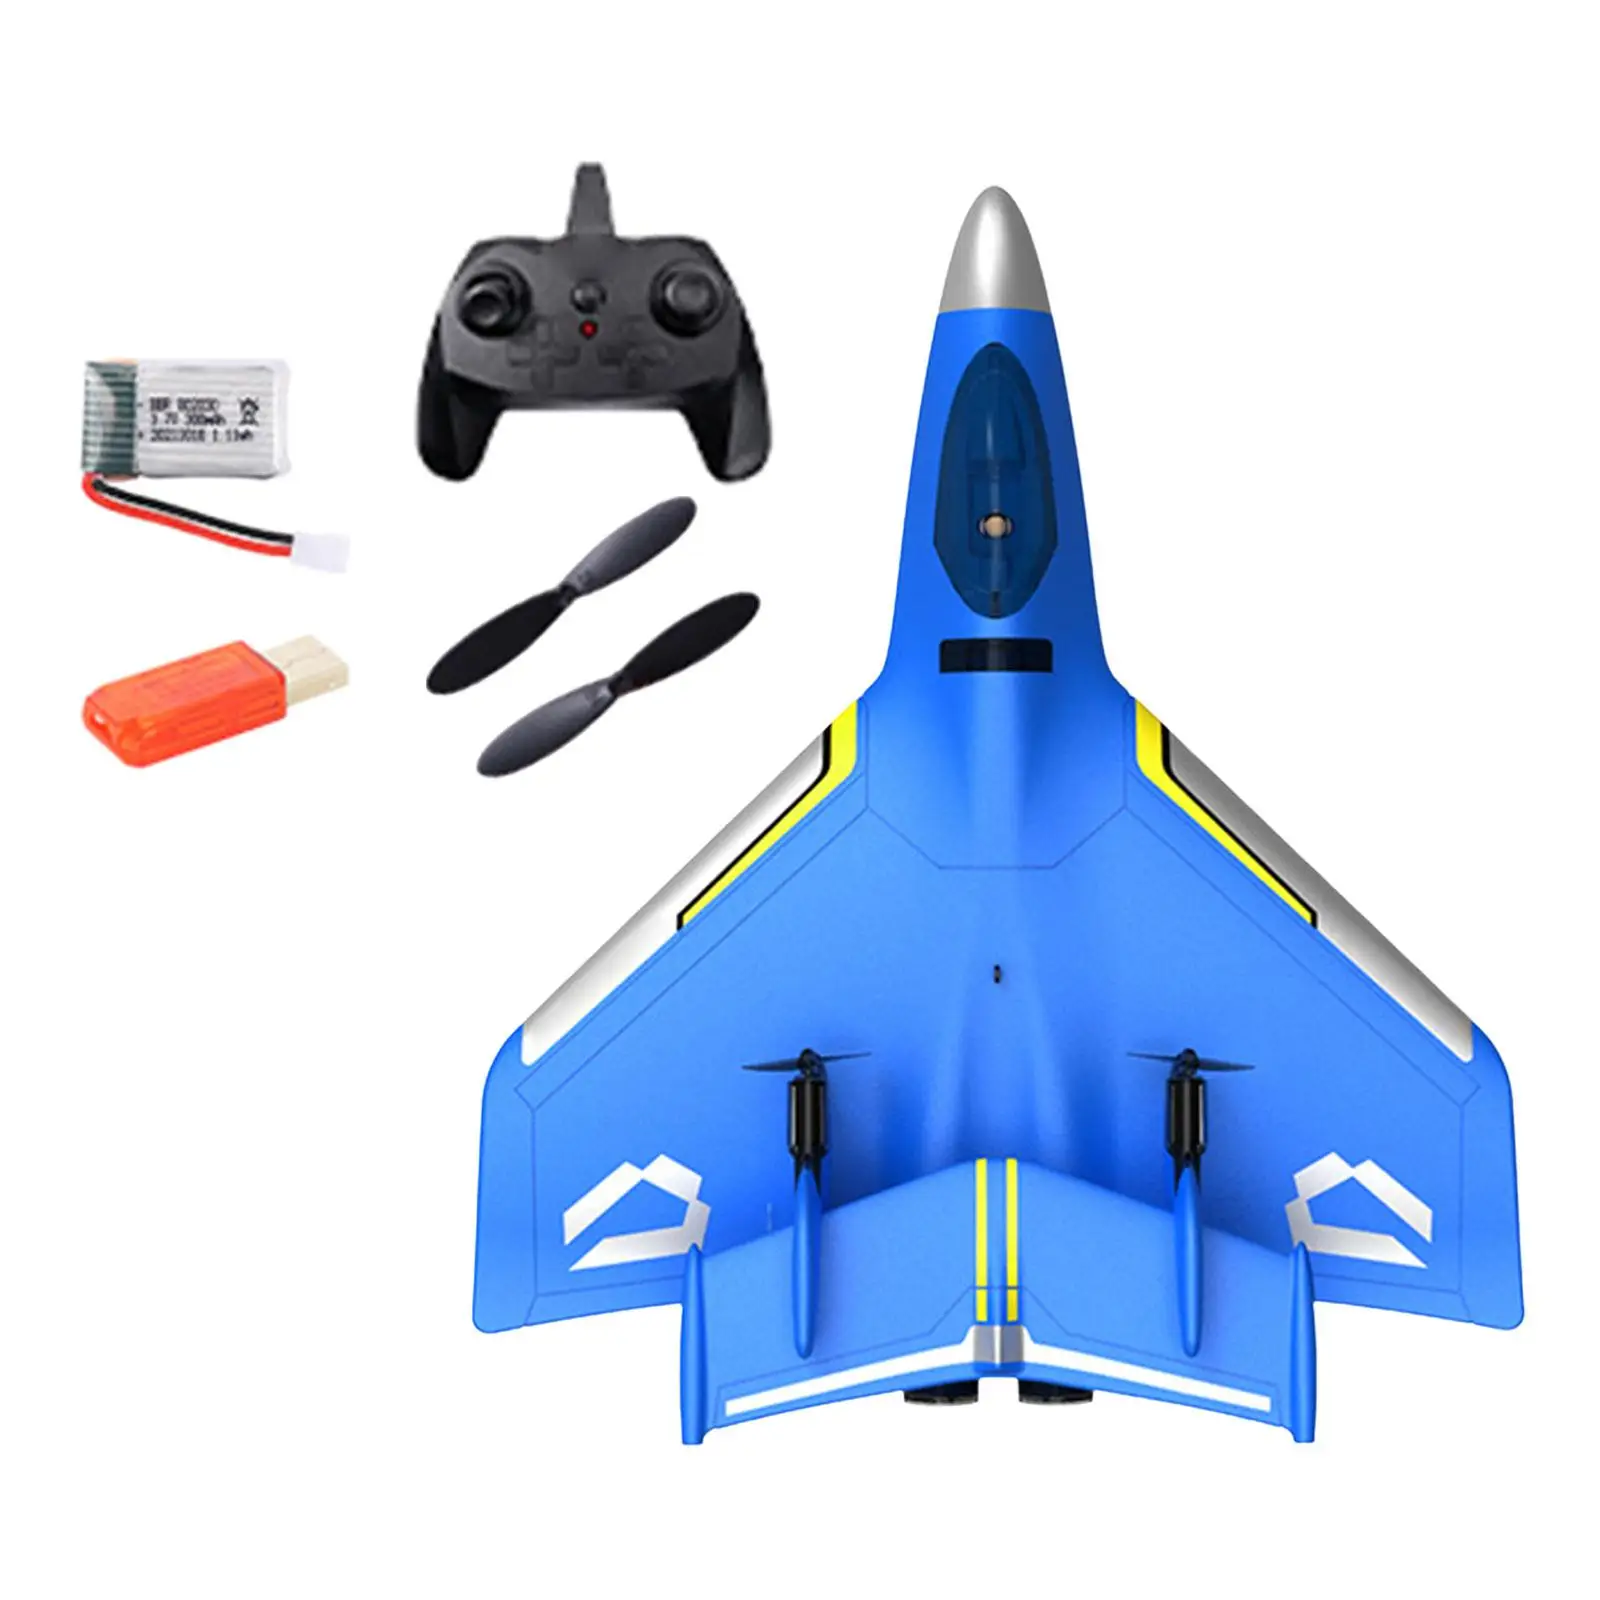 RC Airplane Lightweight 2.4GHz Anti Collision Remote Control Airplane RC Glider Aircraft for Kids Boys Girls Adults Beginner